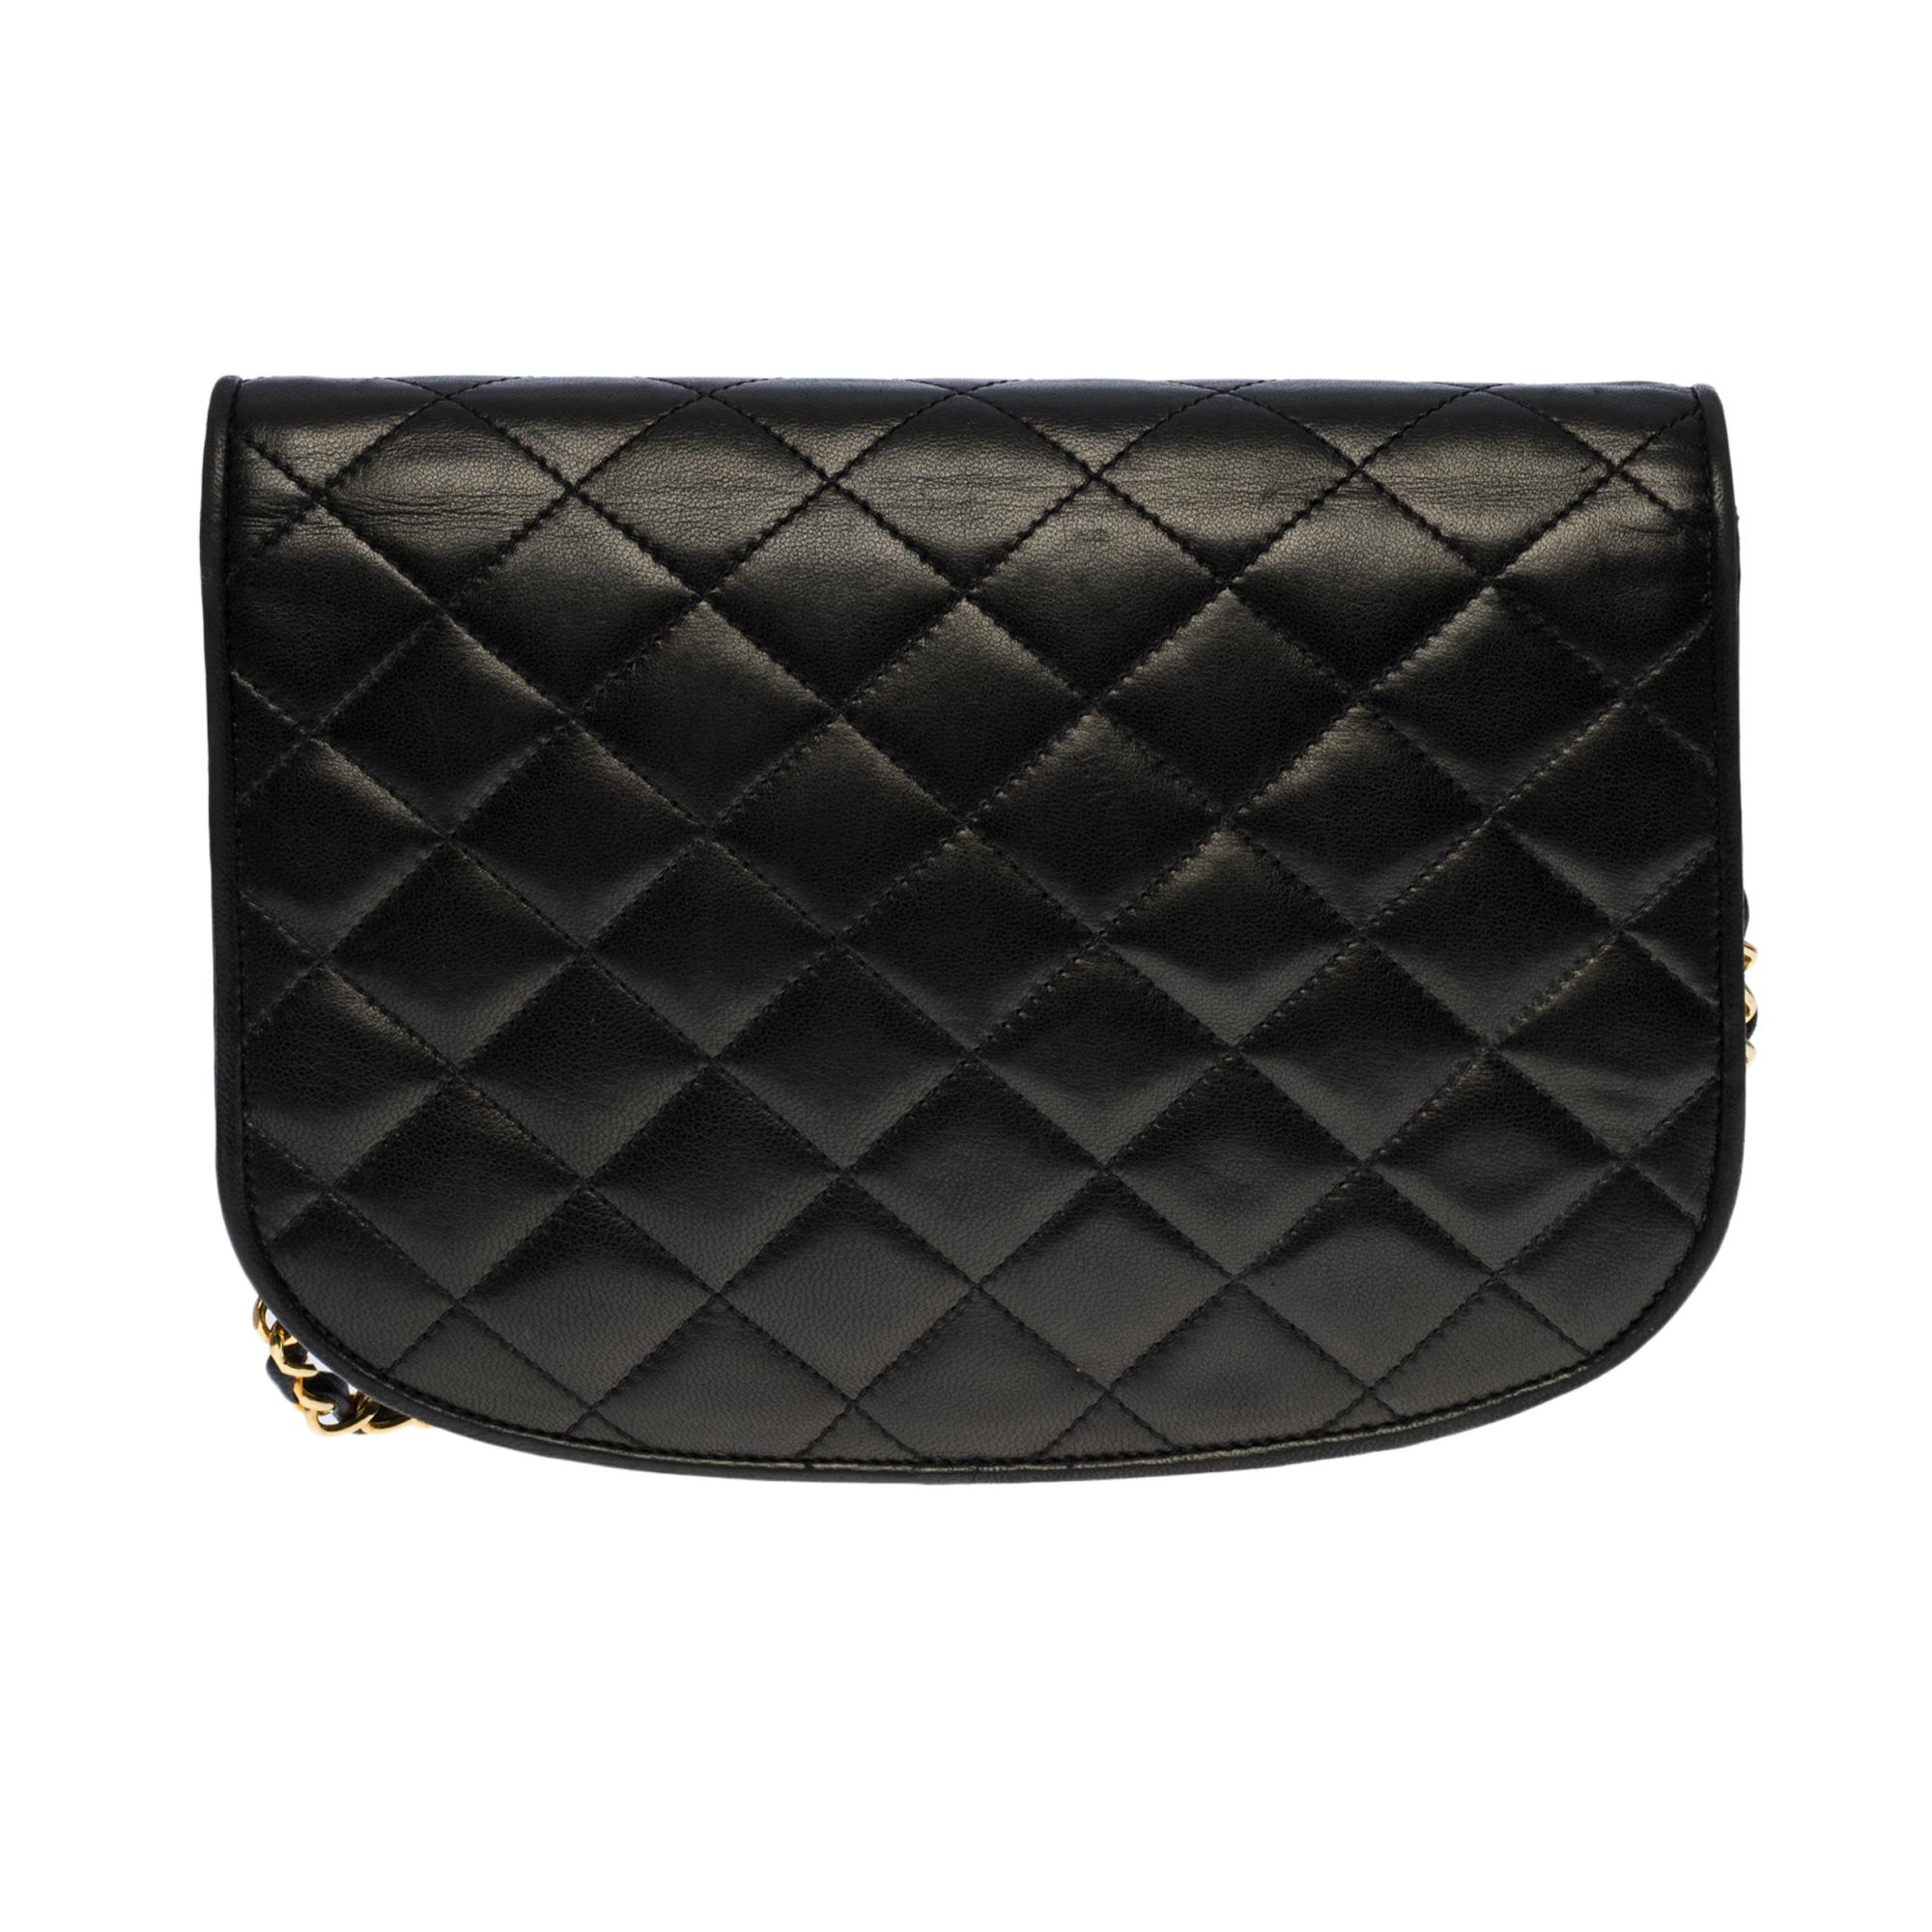 Very chic Chanel Classic flap shoulder bag in black quilted leather, gold-plated metal hardware, a gold-plated metal chain handle interlaced with black leather for a shoulder or shoulder strap
 
Two-tone metal seal (gold and silver CC) on flap